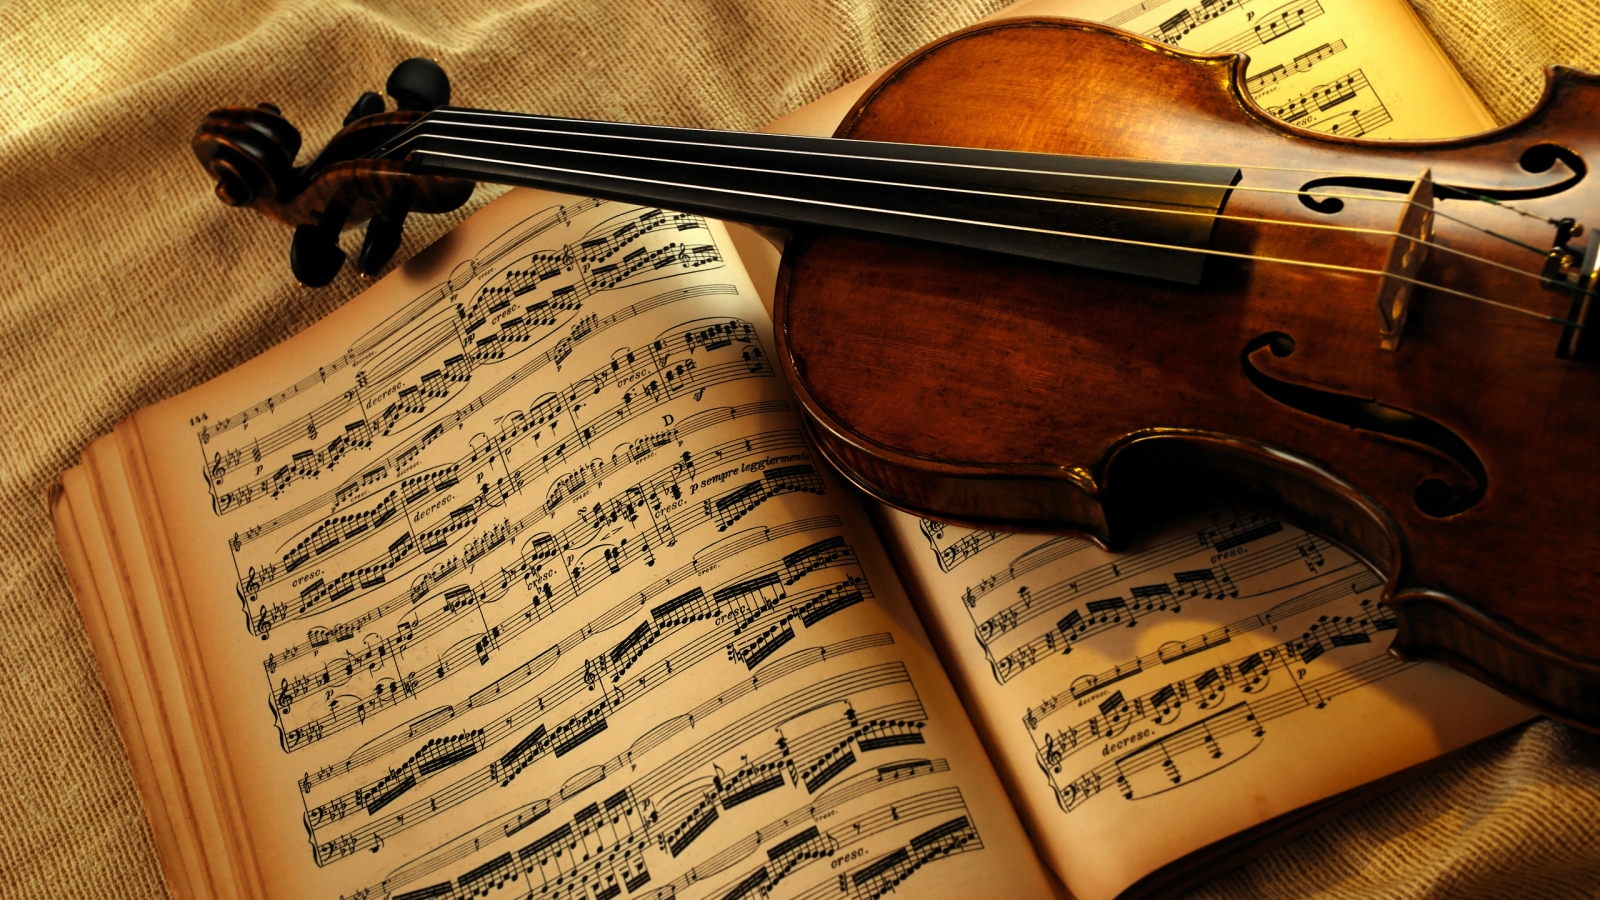 Old Violin and Book for 1600 x 900 HDTV resolution